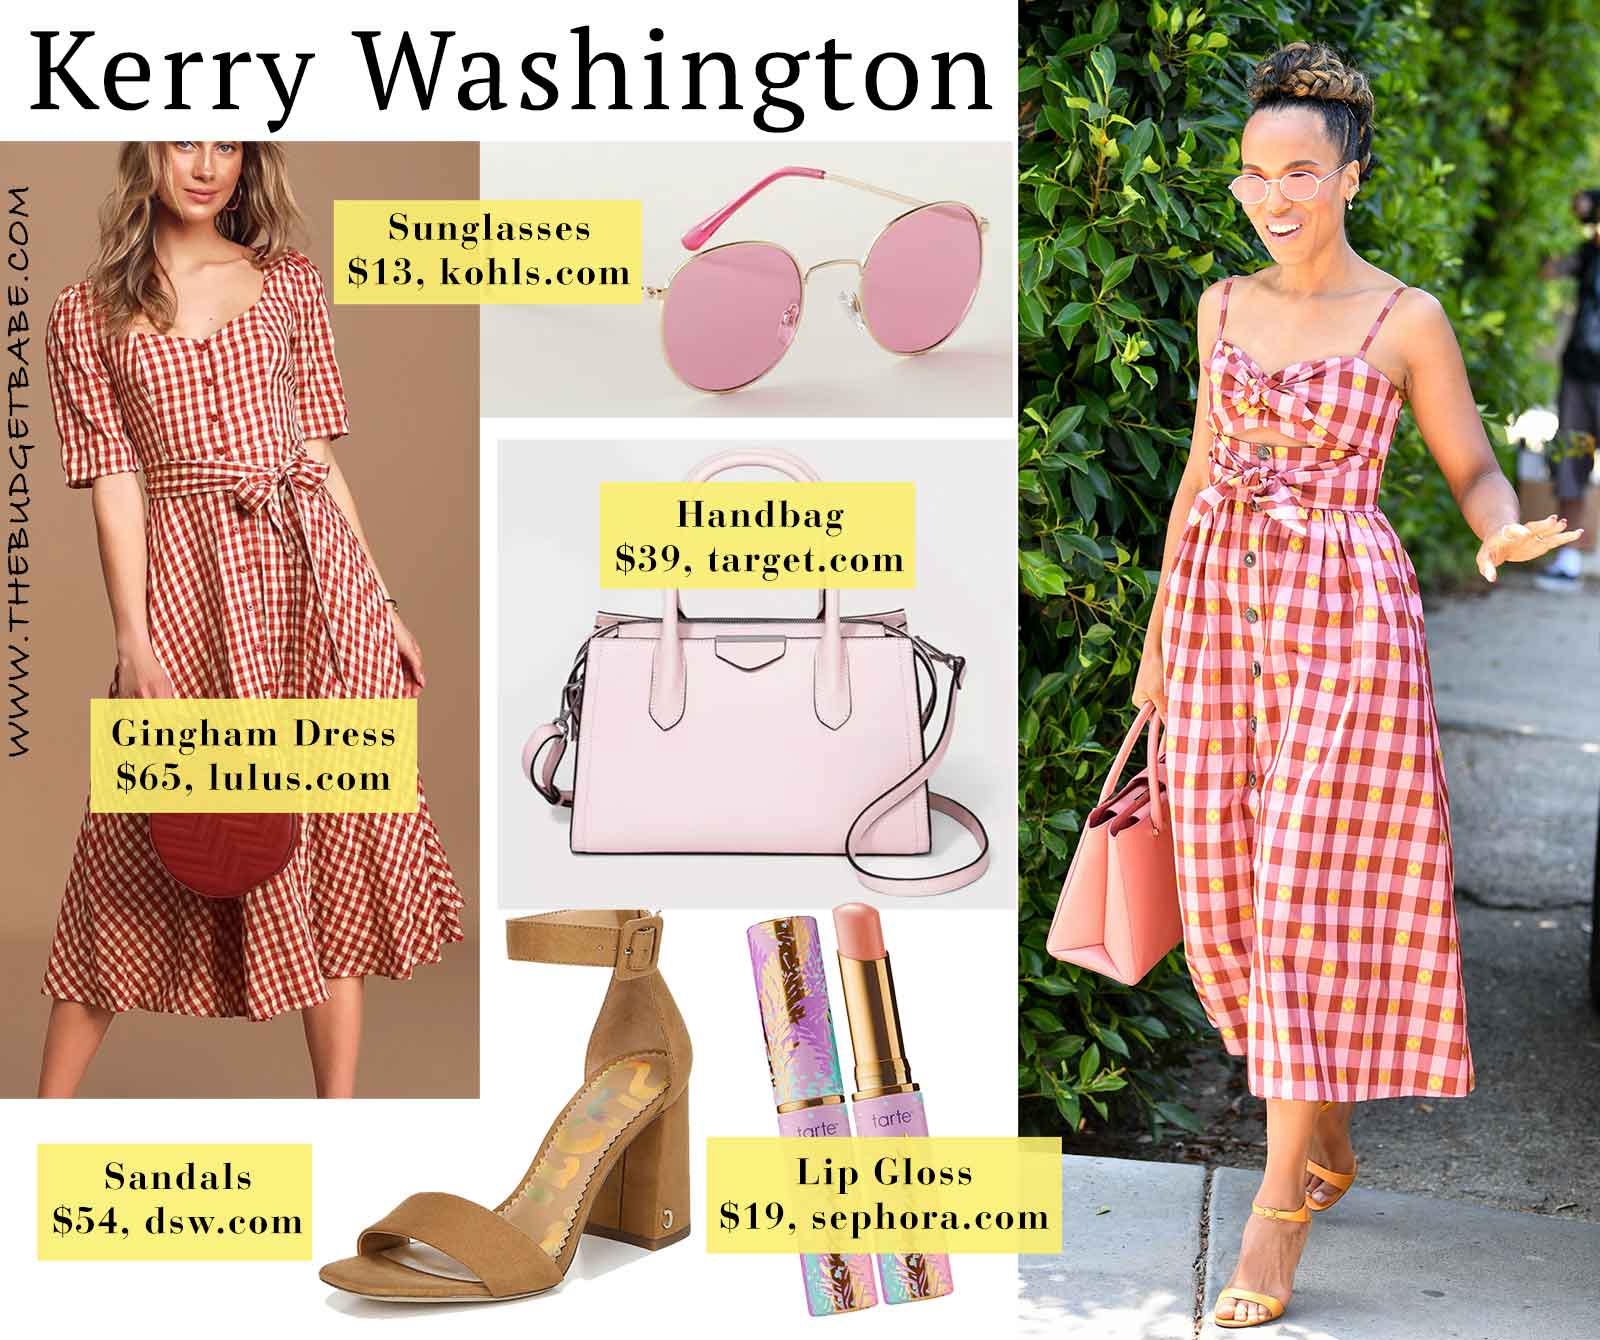 Kerry Washington's gingham dress and strappy sandals look for less